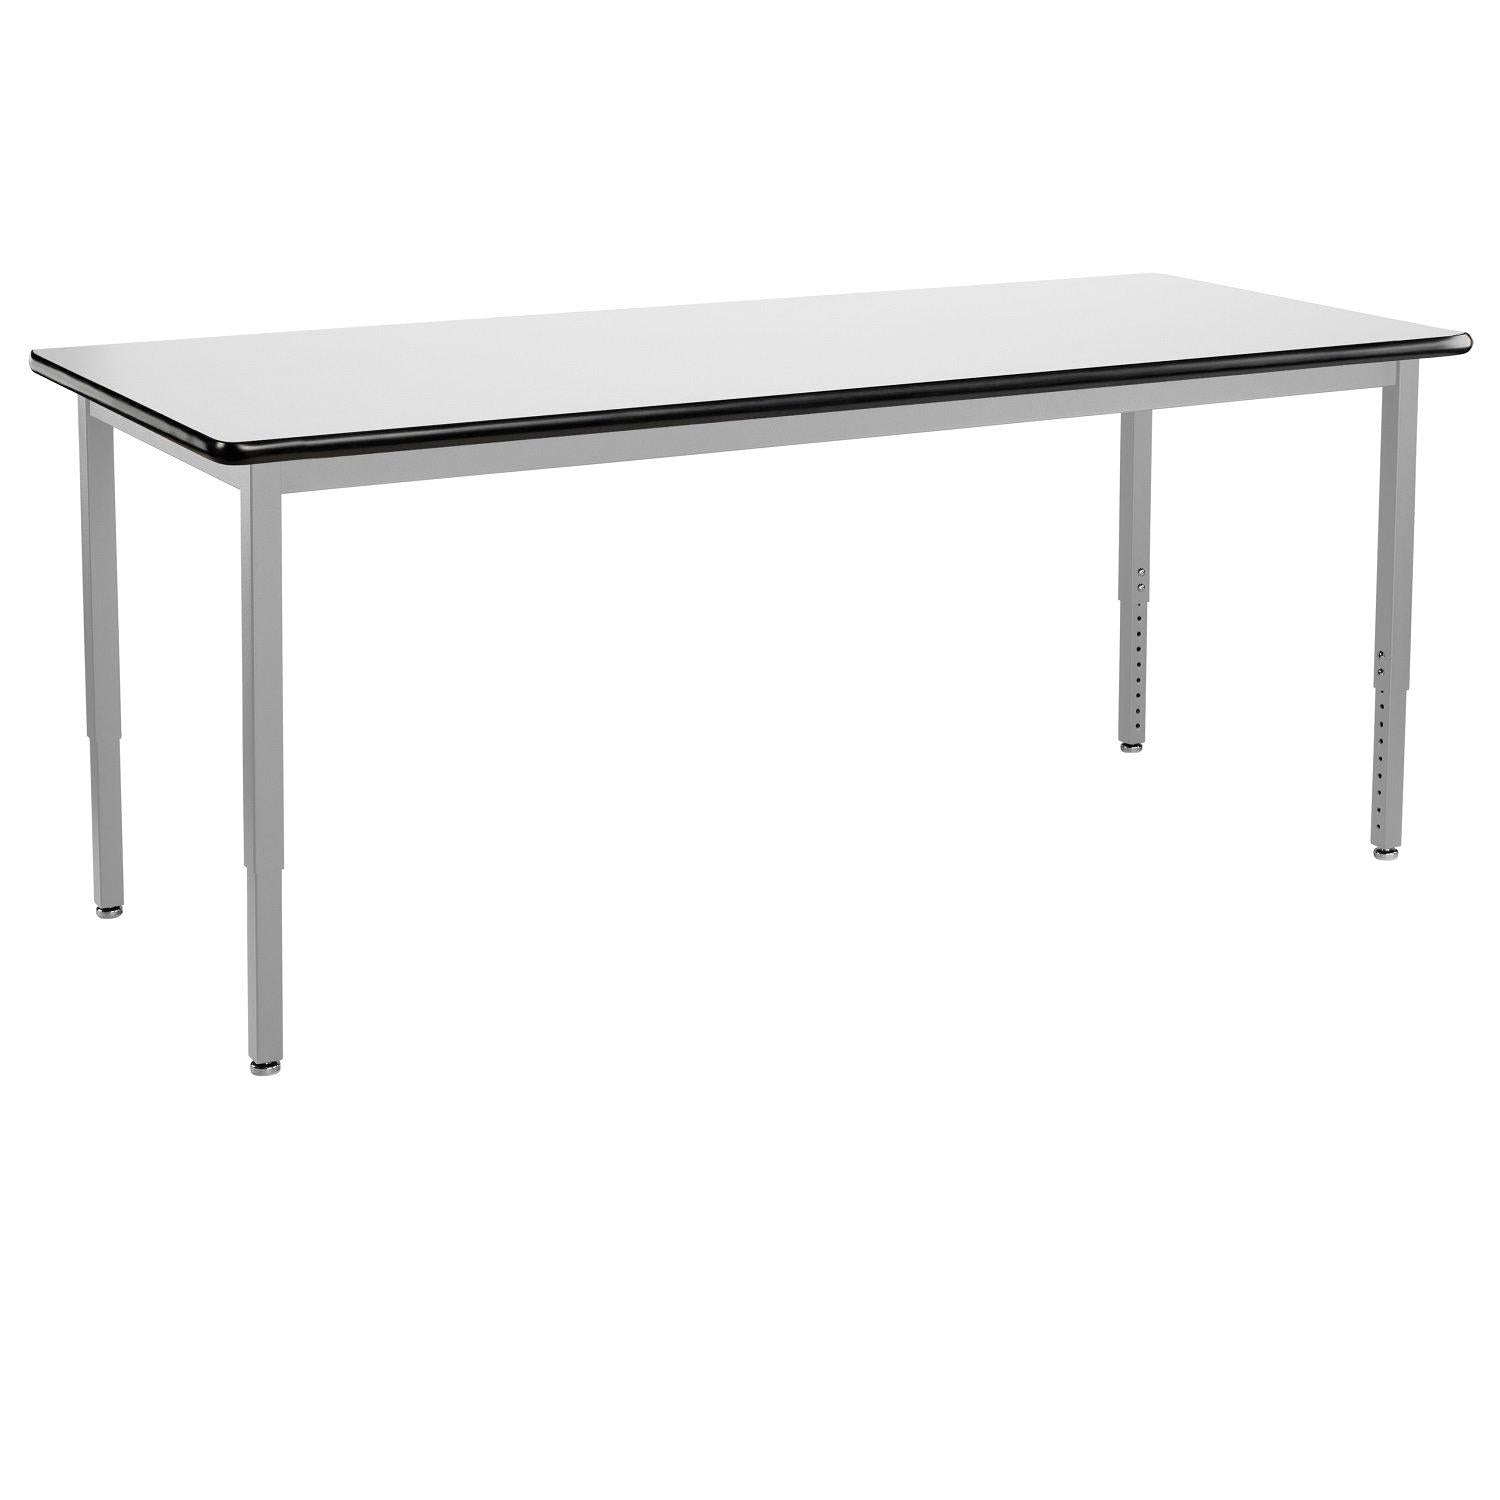 Heavy-Duty Height-Adjustable Utility Table, Soft Grey Frame, 24" x 84", Whiteboard High-Pressure Laminate Top